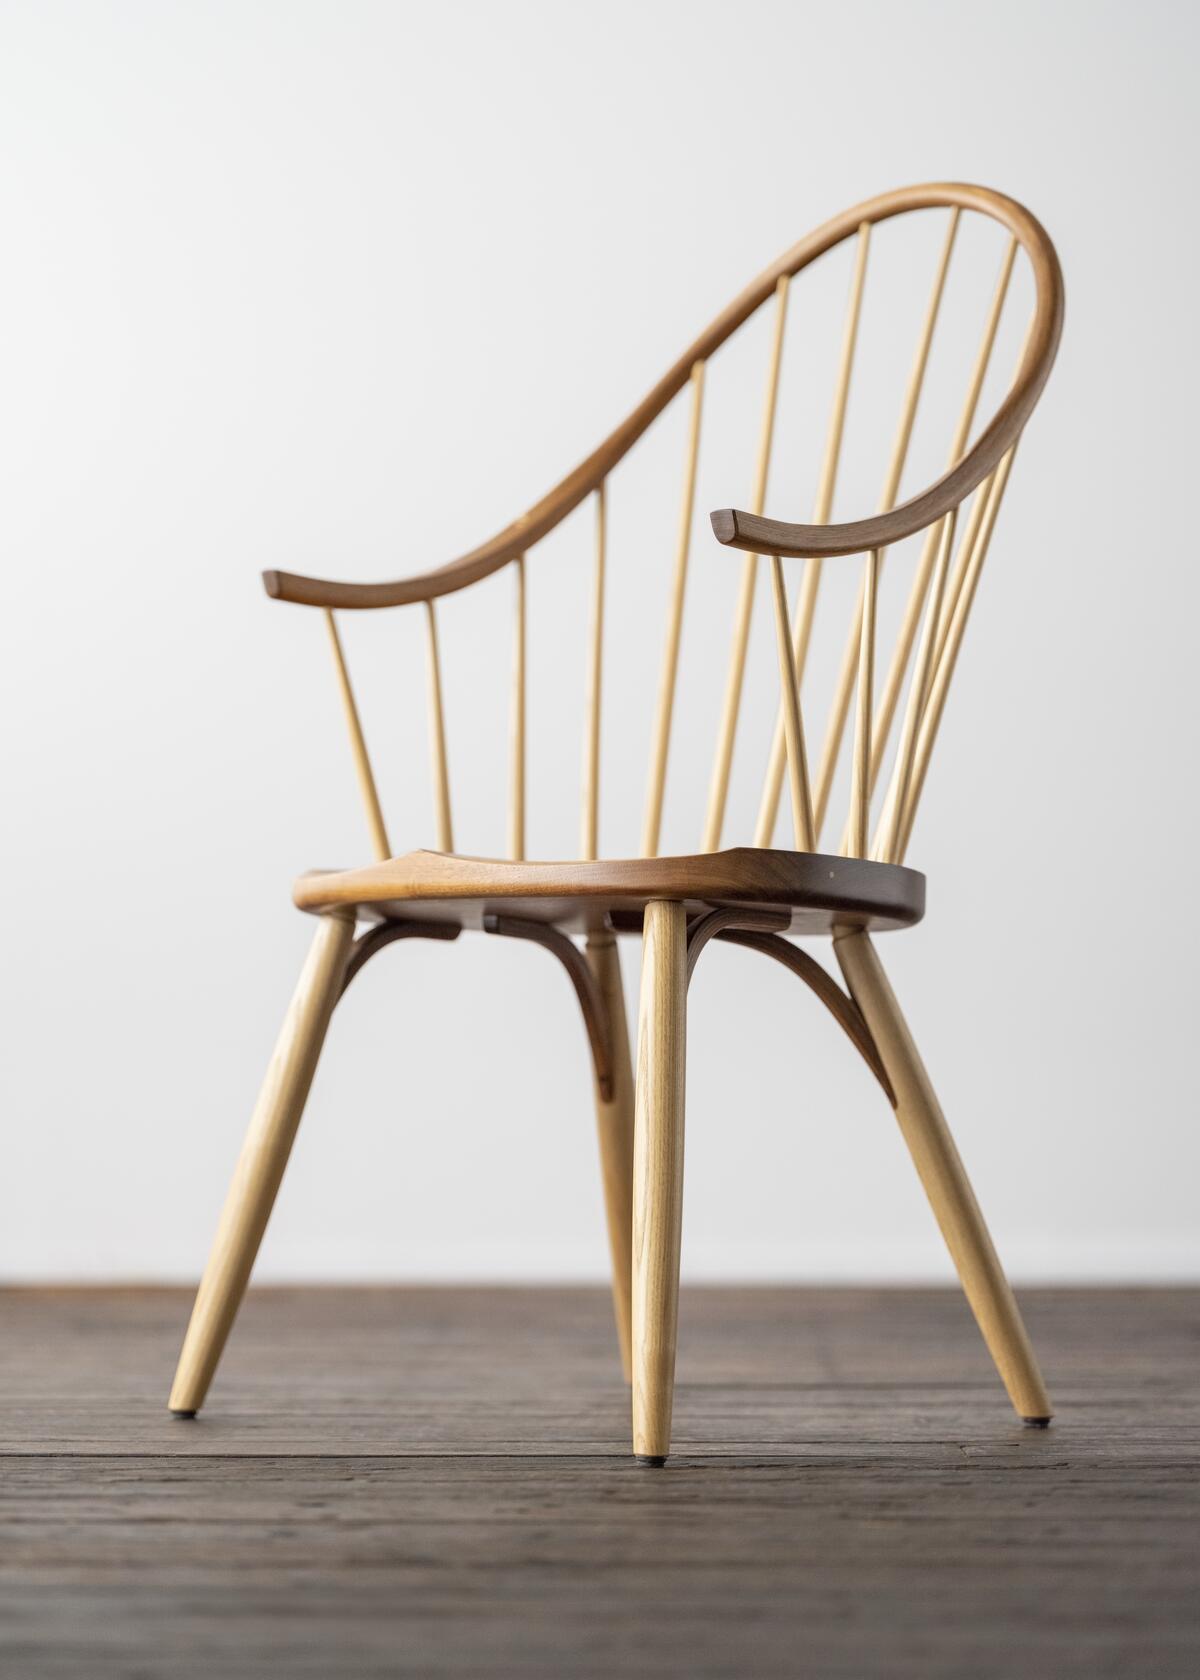 The Continuous Arm Chair by Thos. Moser